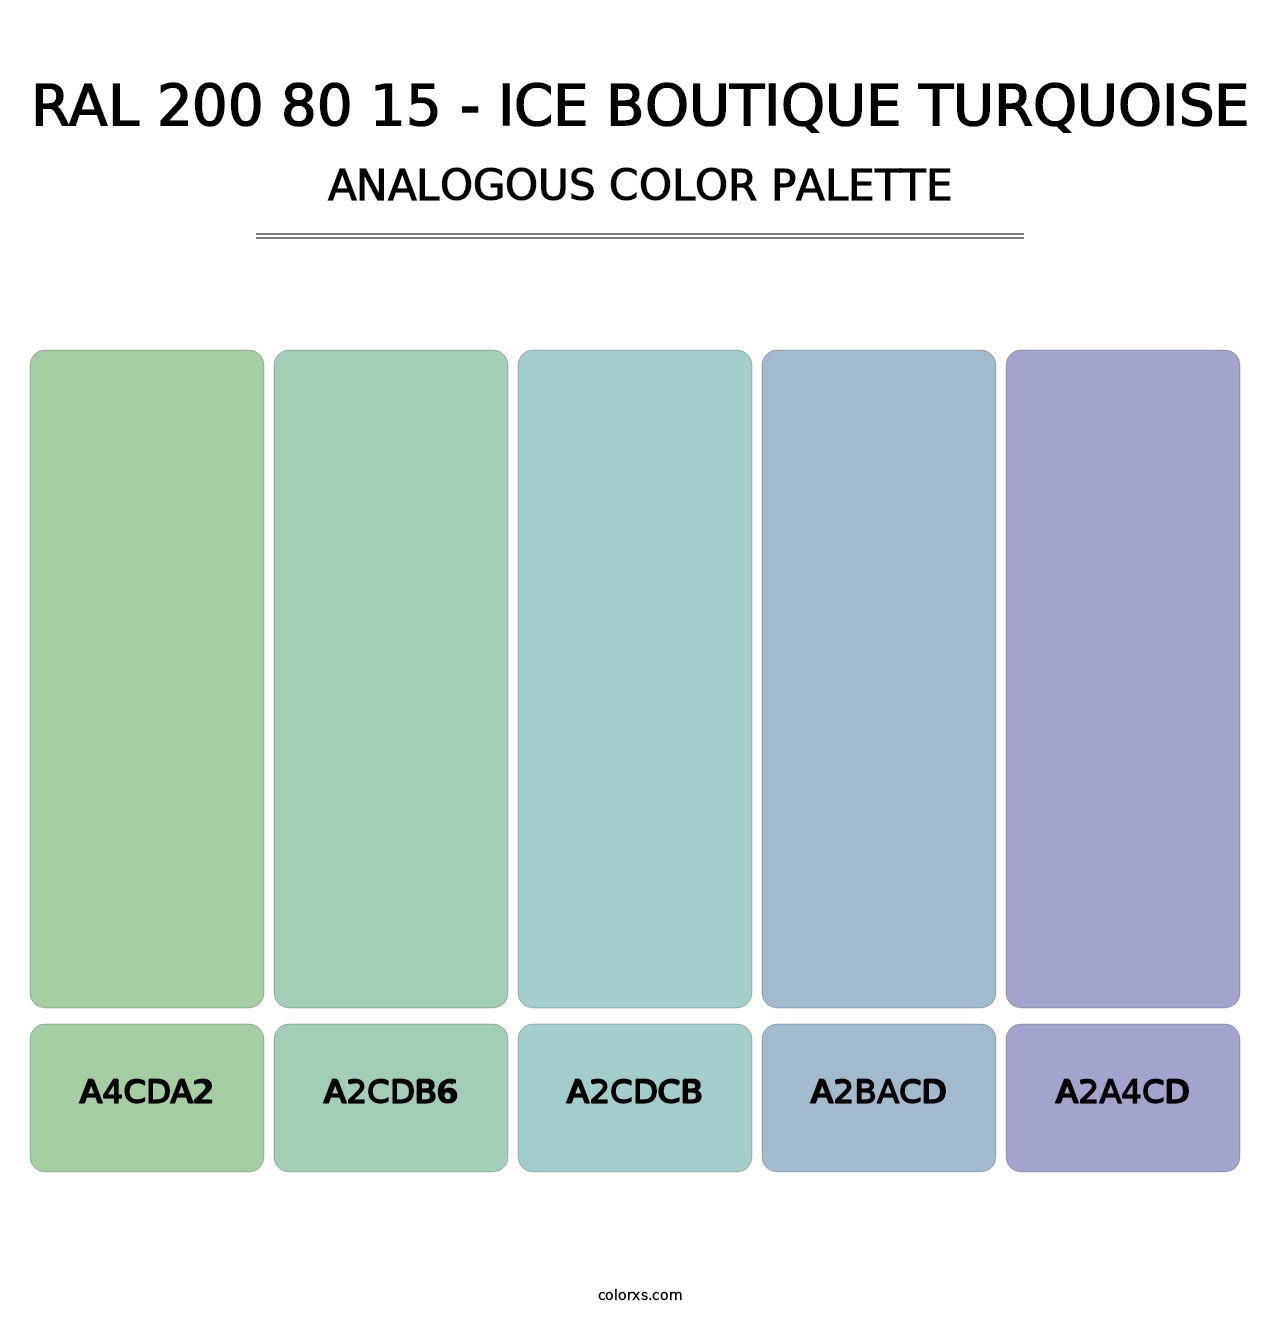 RAL 200 80 15 - Ice Boutique Turquoise - Analogous Color Palette